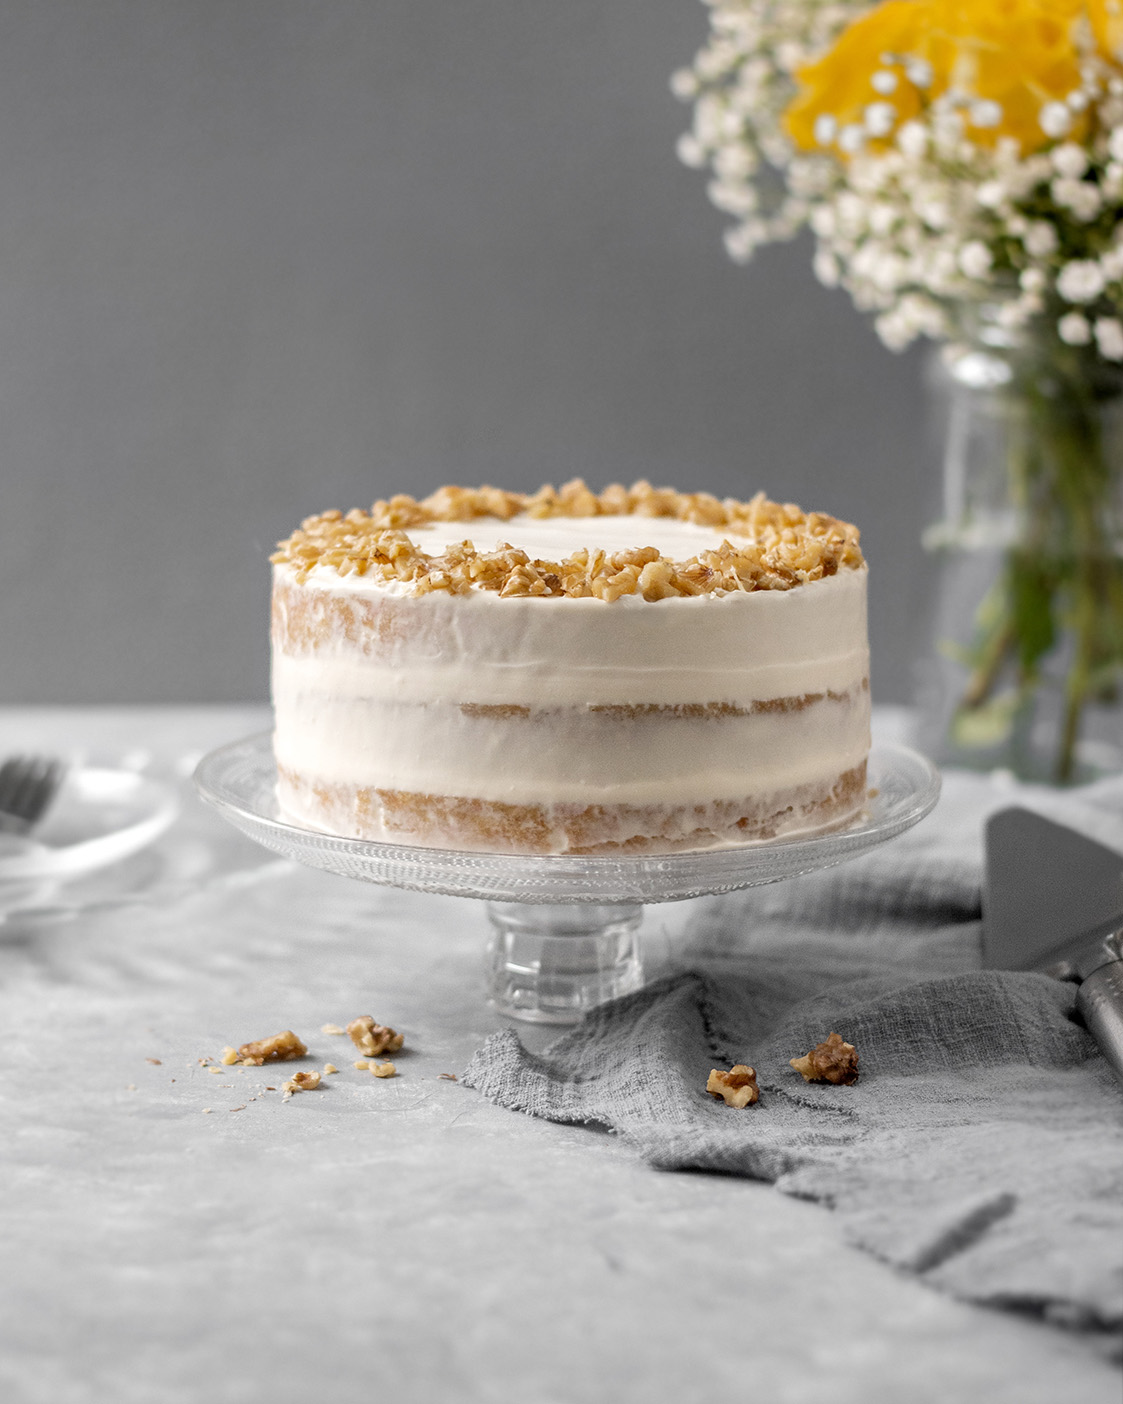 Carrot Cake with Cream Cheese Frosting - The Sweet Balance